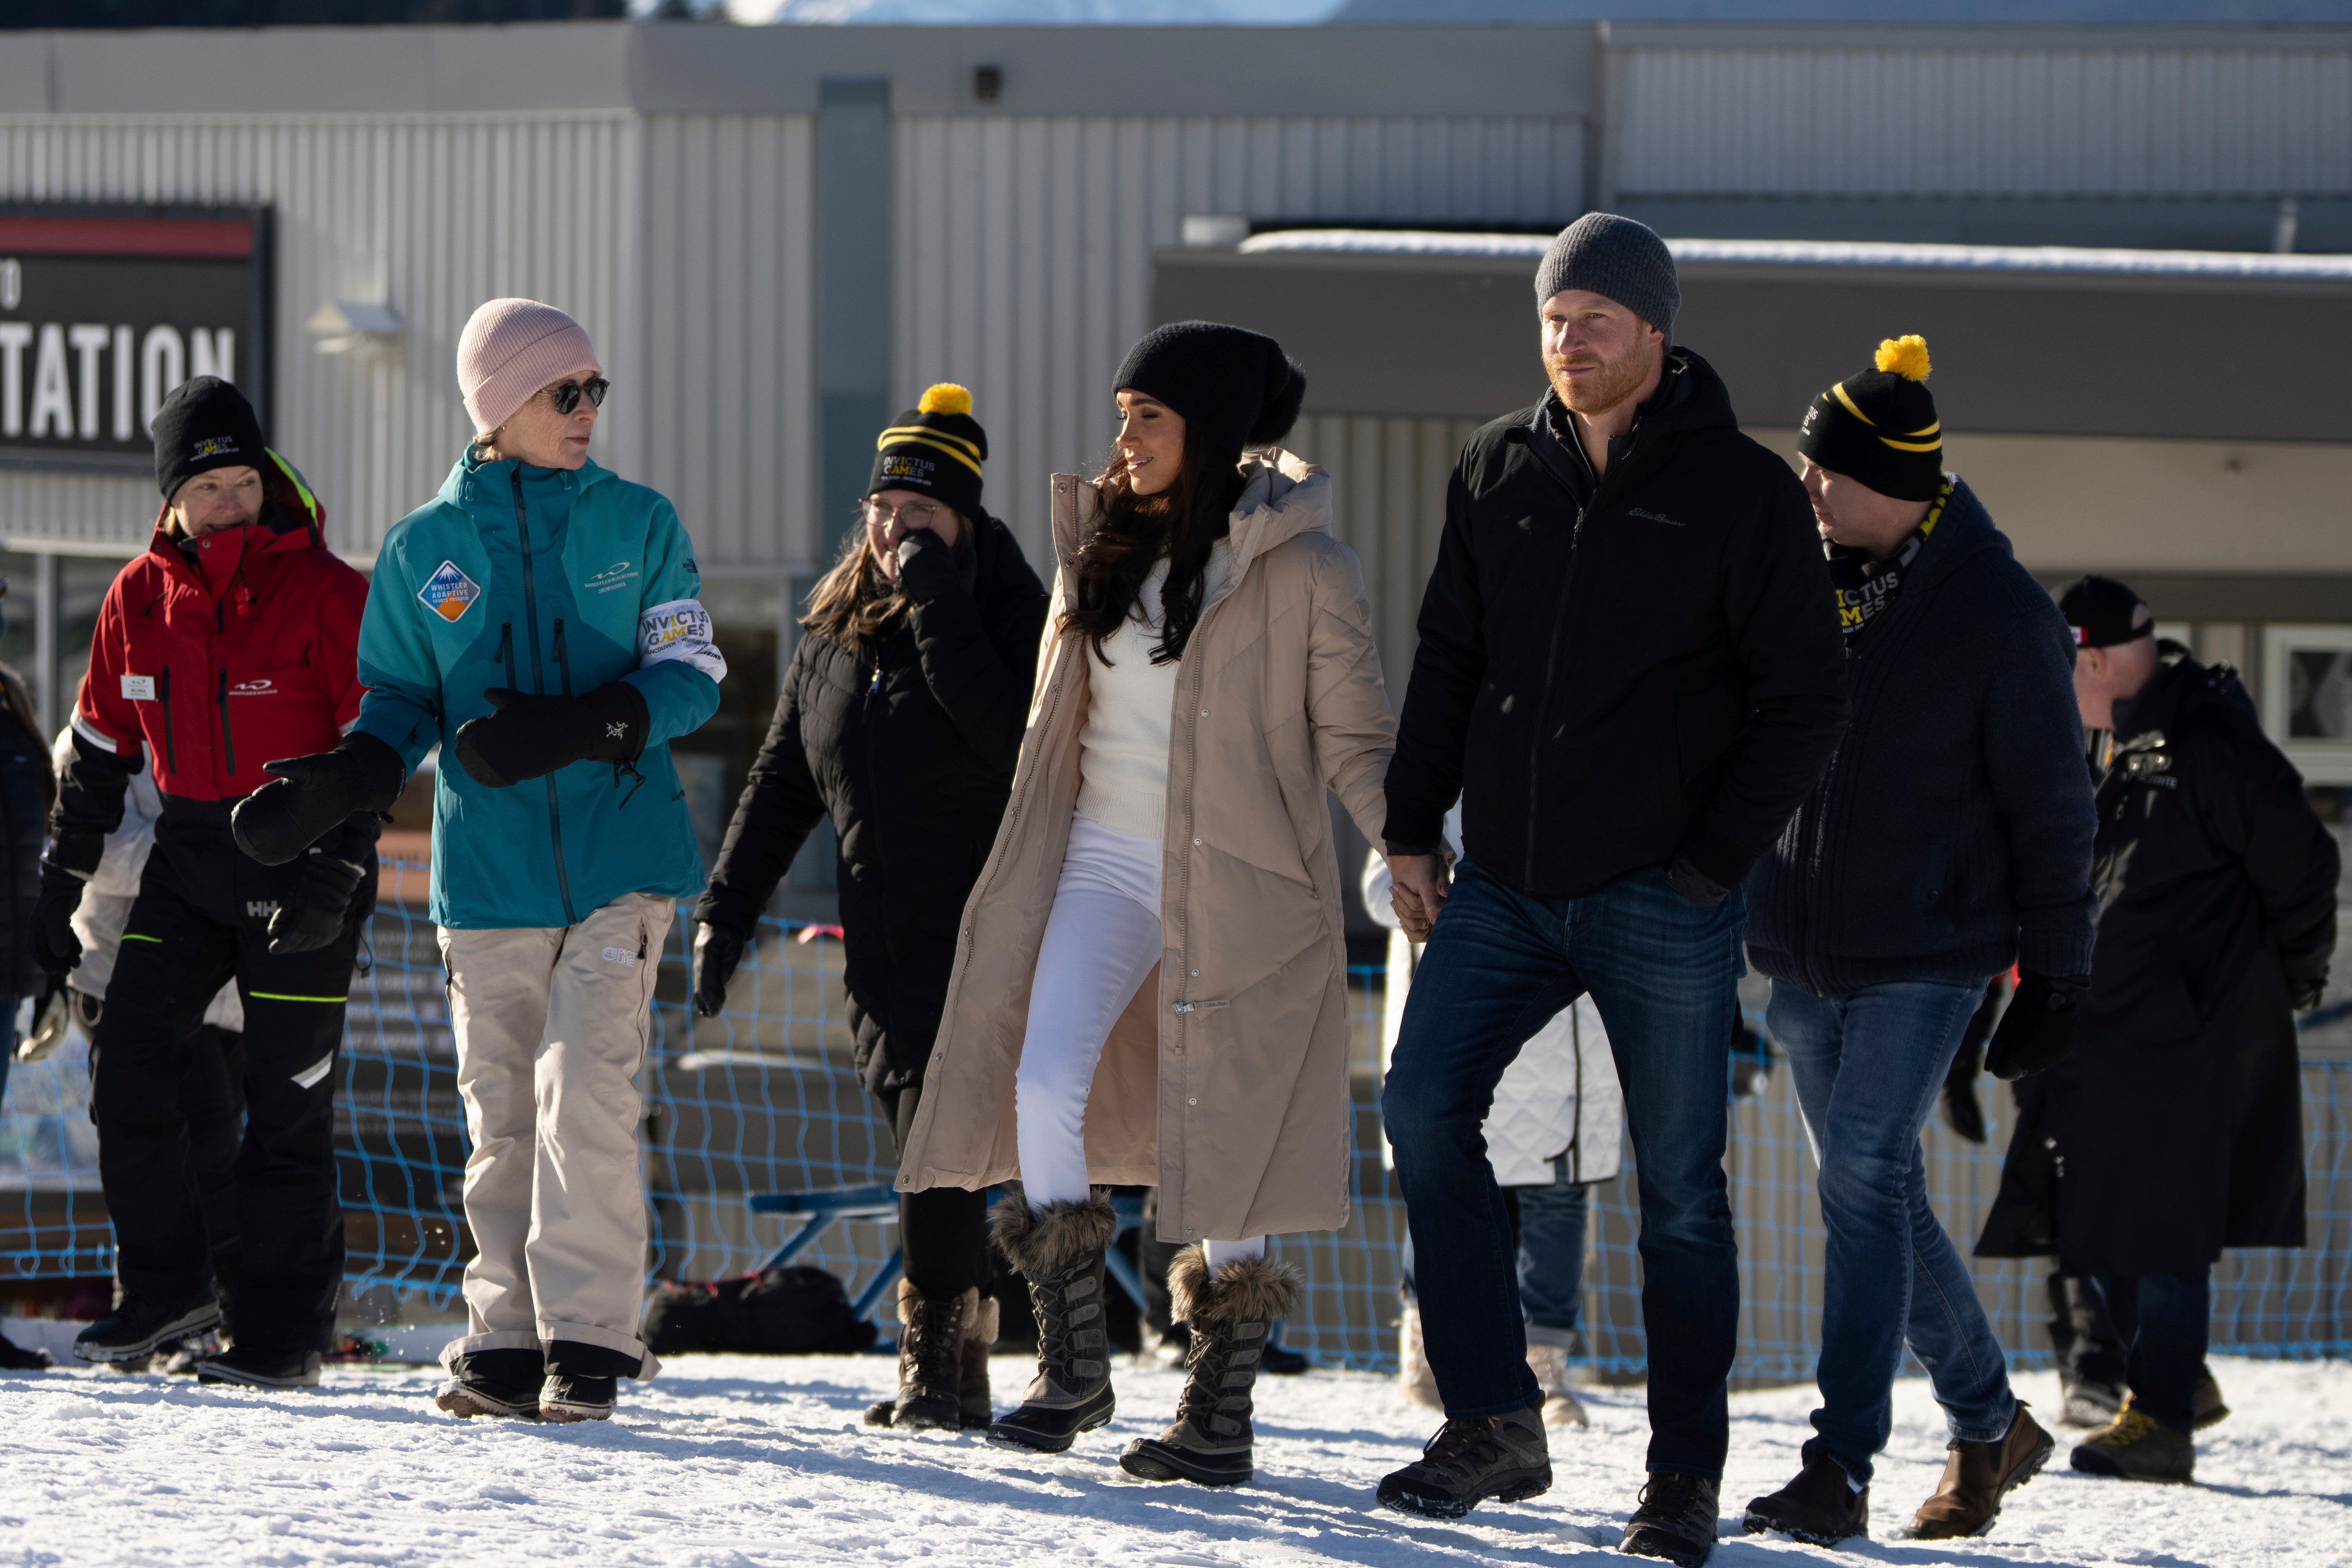 The Sussexes visited the training camp in Whistler to mark a year before the Invictus Games take place there